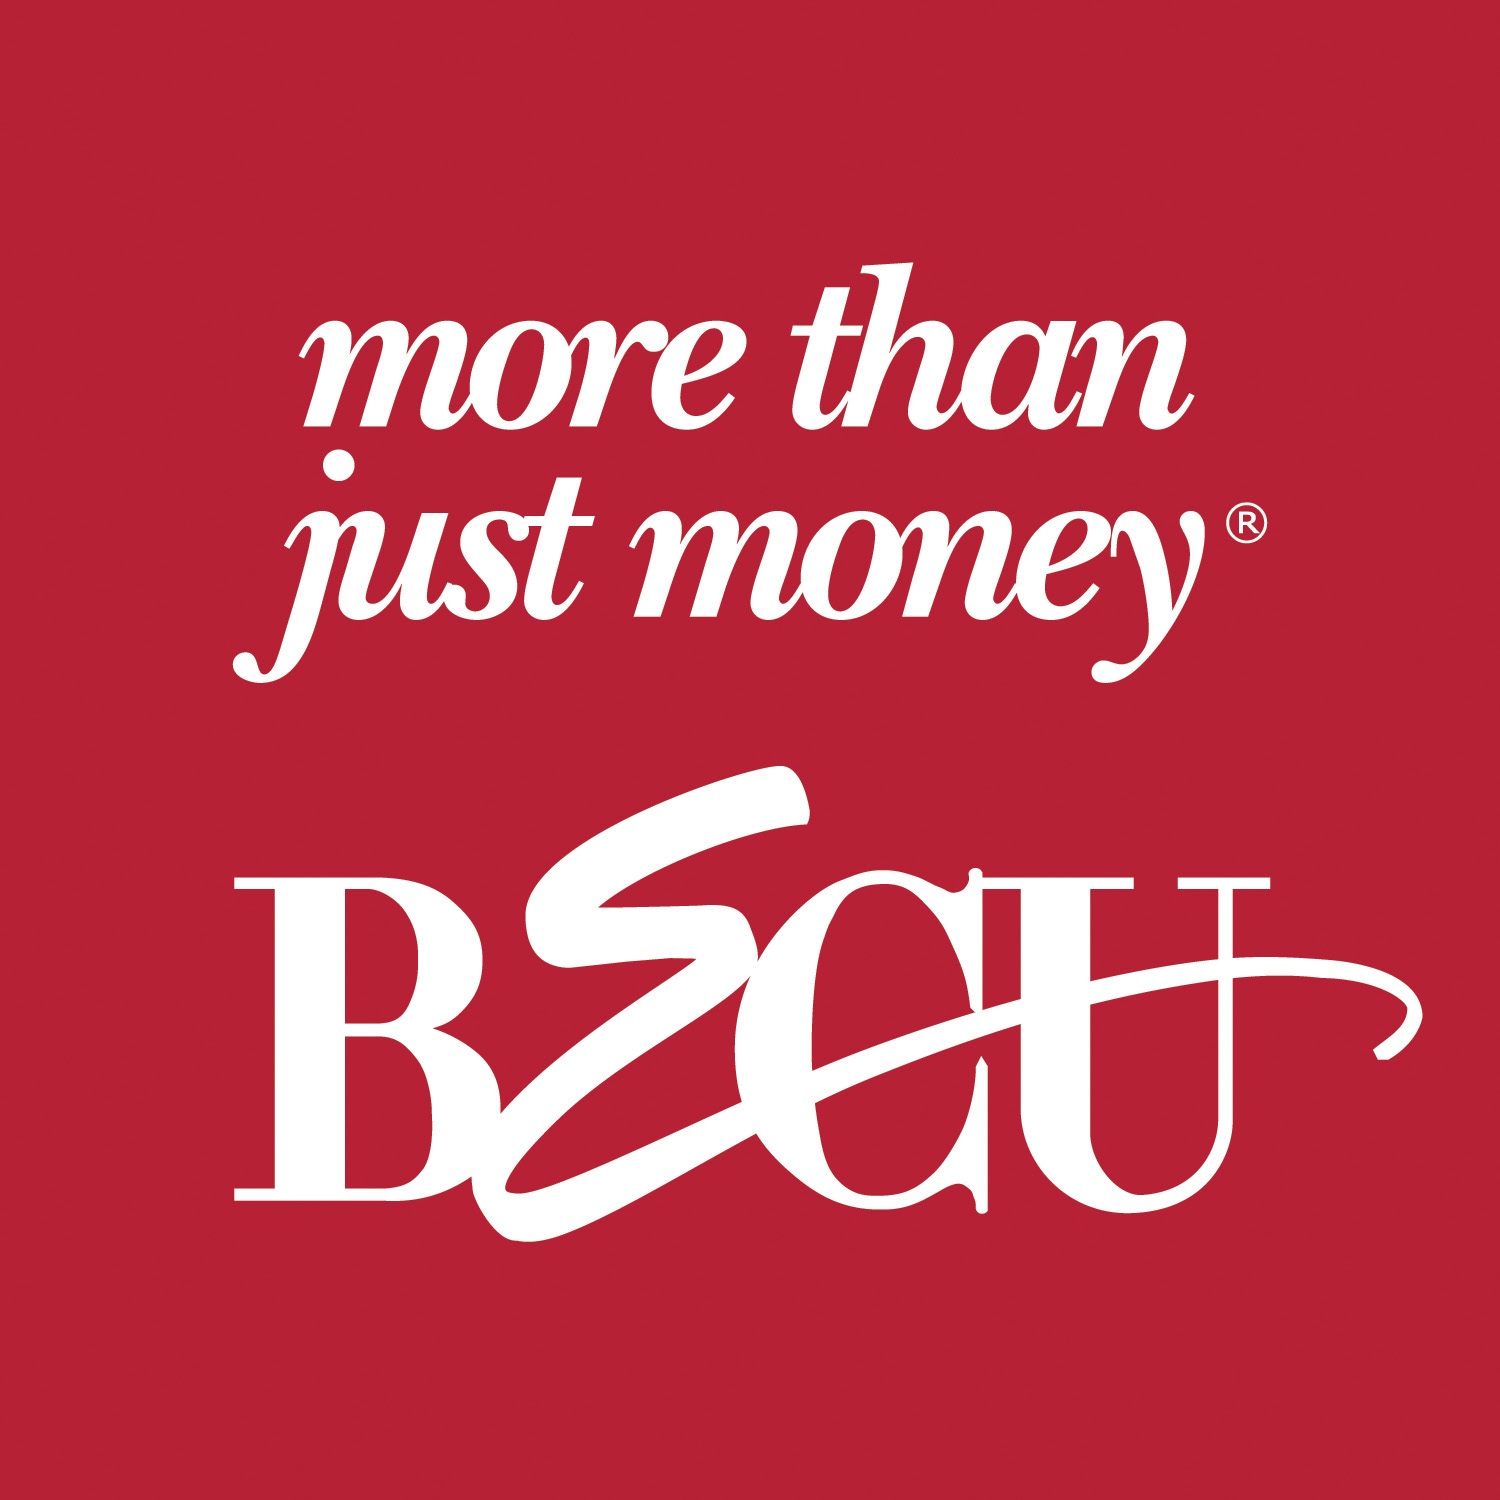 Becu Opens First Branches In Spokane Expanding Its Members